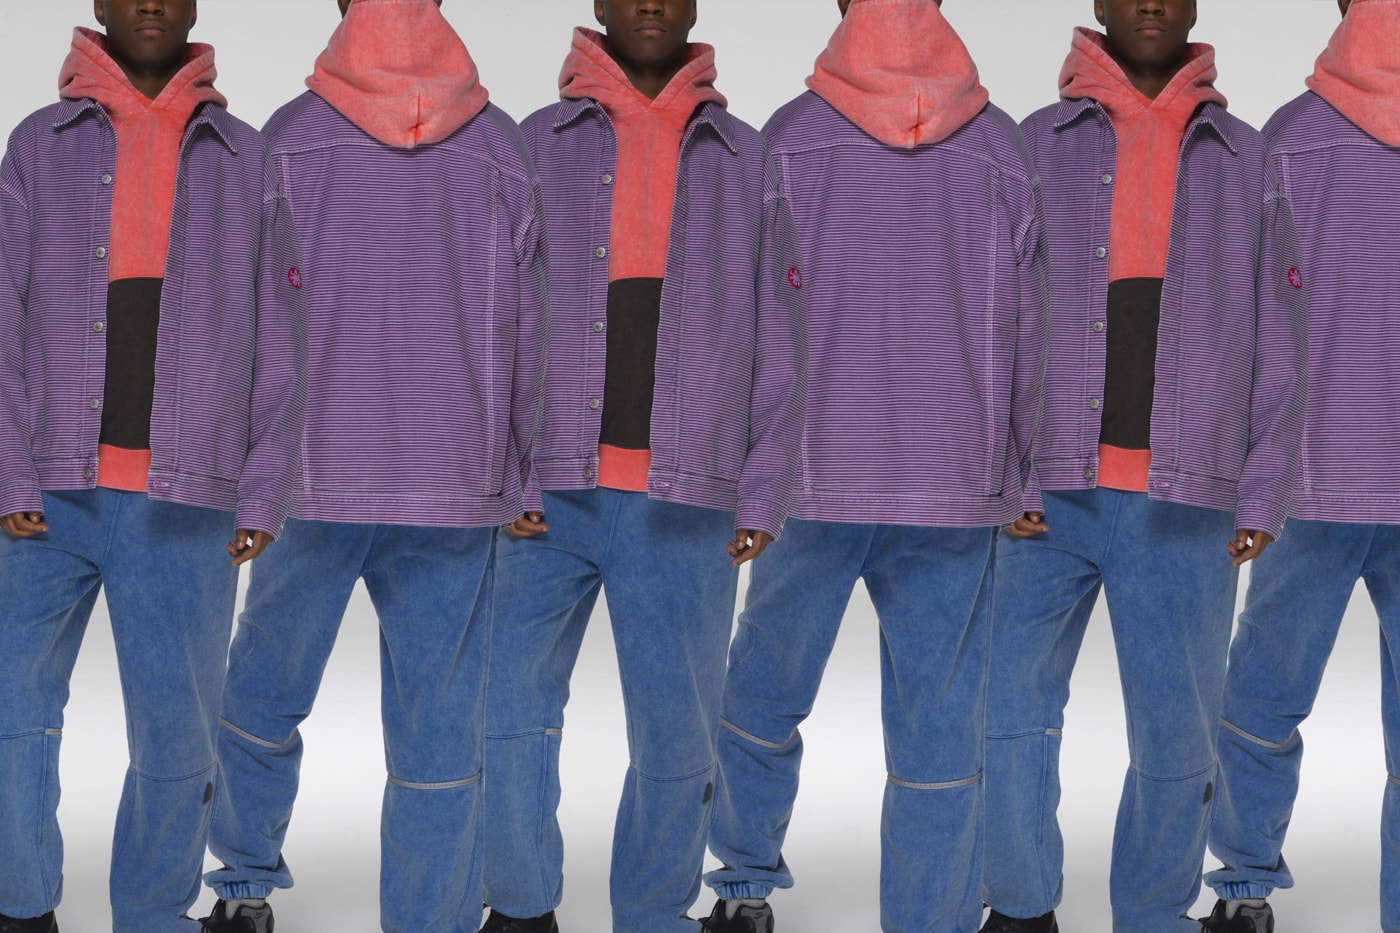 Cav Empt C.E スケートシング スケシン Spring Summer 2019 Collection Lookbook Toby Feltwell Sk8thing Jacket Hoodie Sweater Beanie Pants socks bags scarf t shirt crewneck shorts